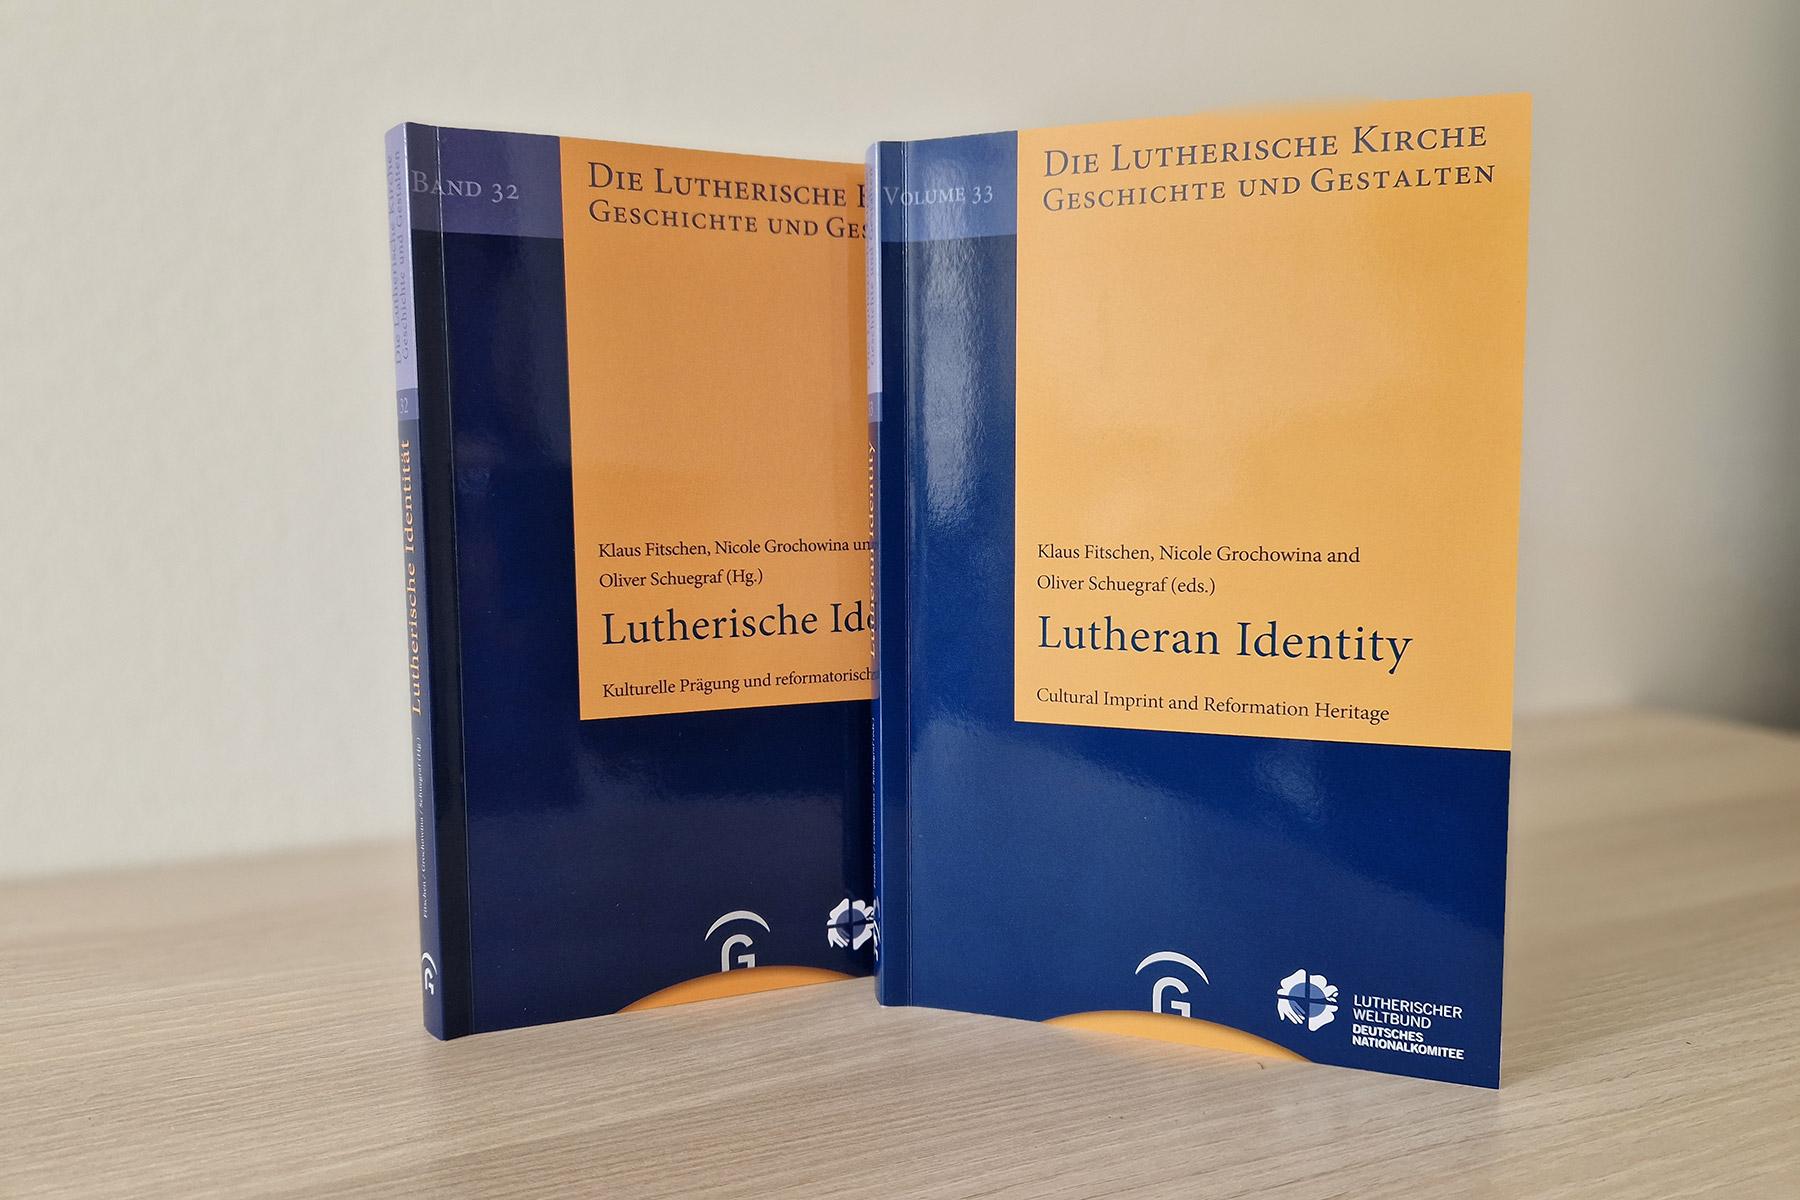 Cover of the new publication “Lutheran Identity – Cultural Imprint and Reformation Heritage”. Photo: GNC/LWF, Astrid Weyermüller